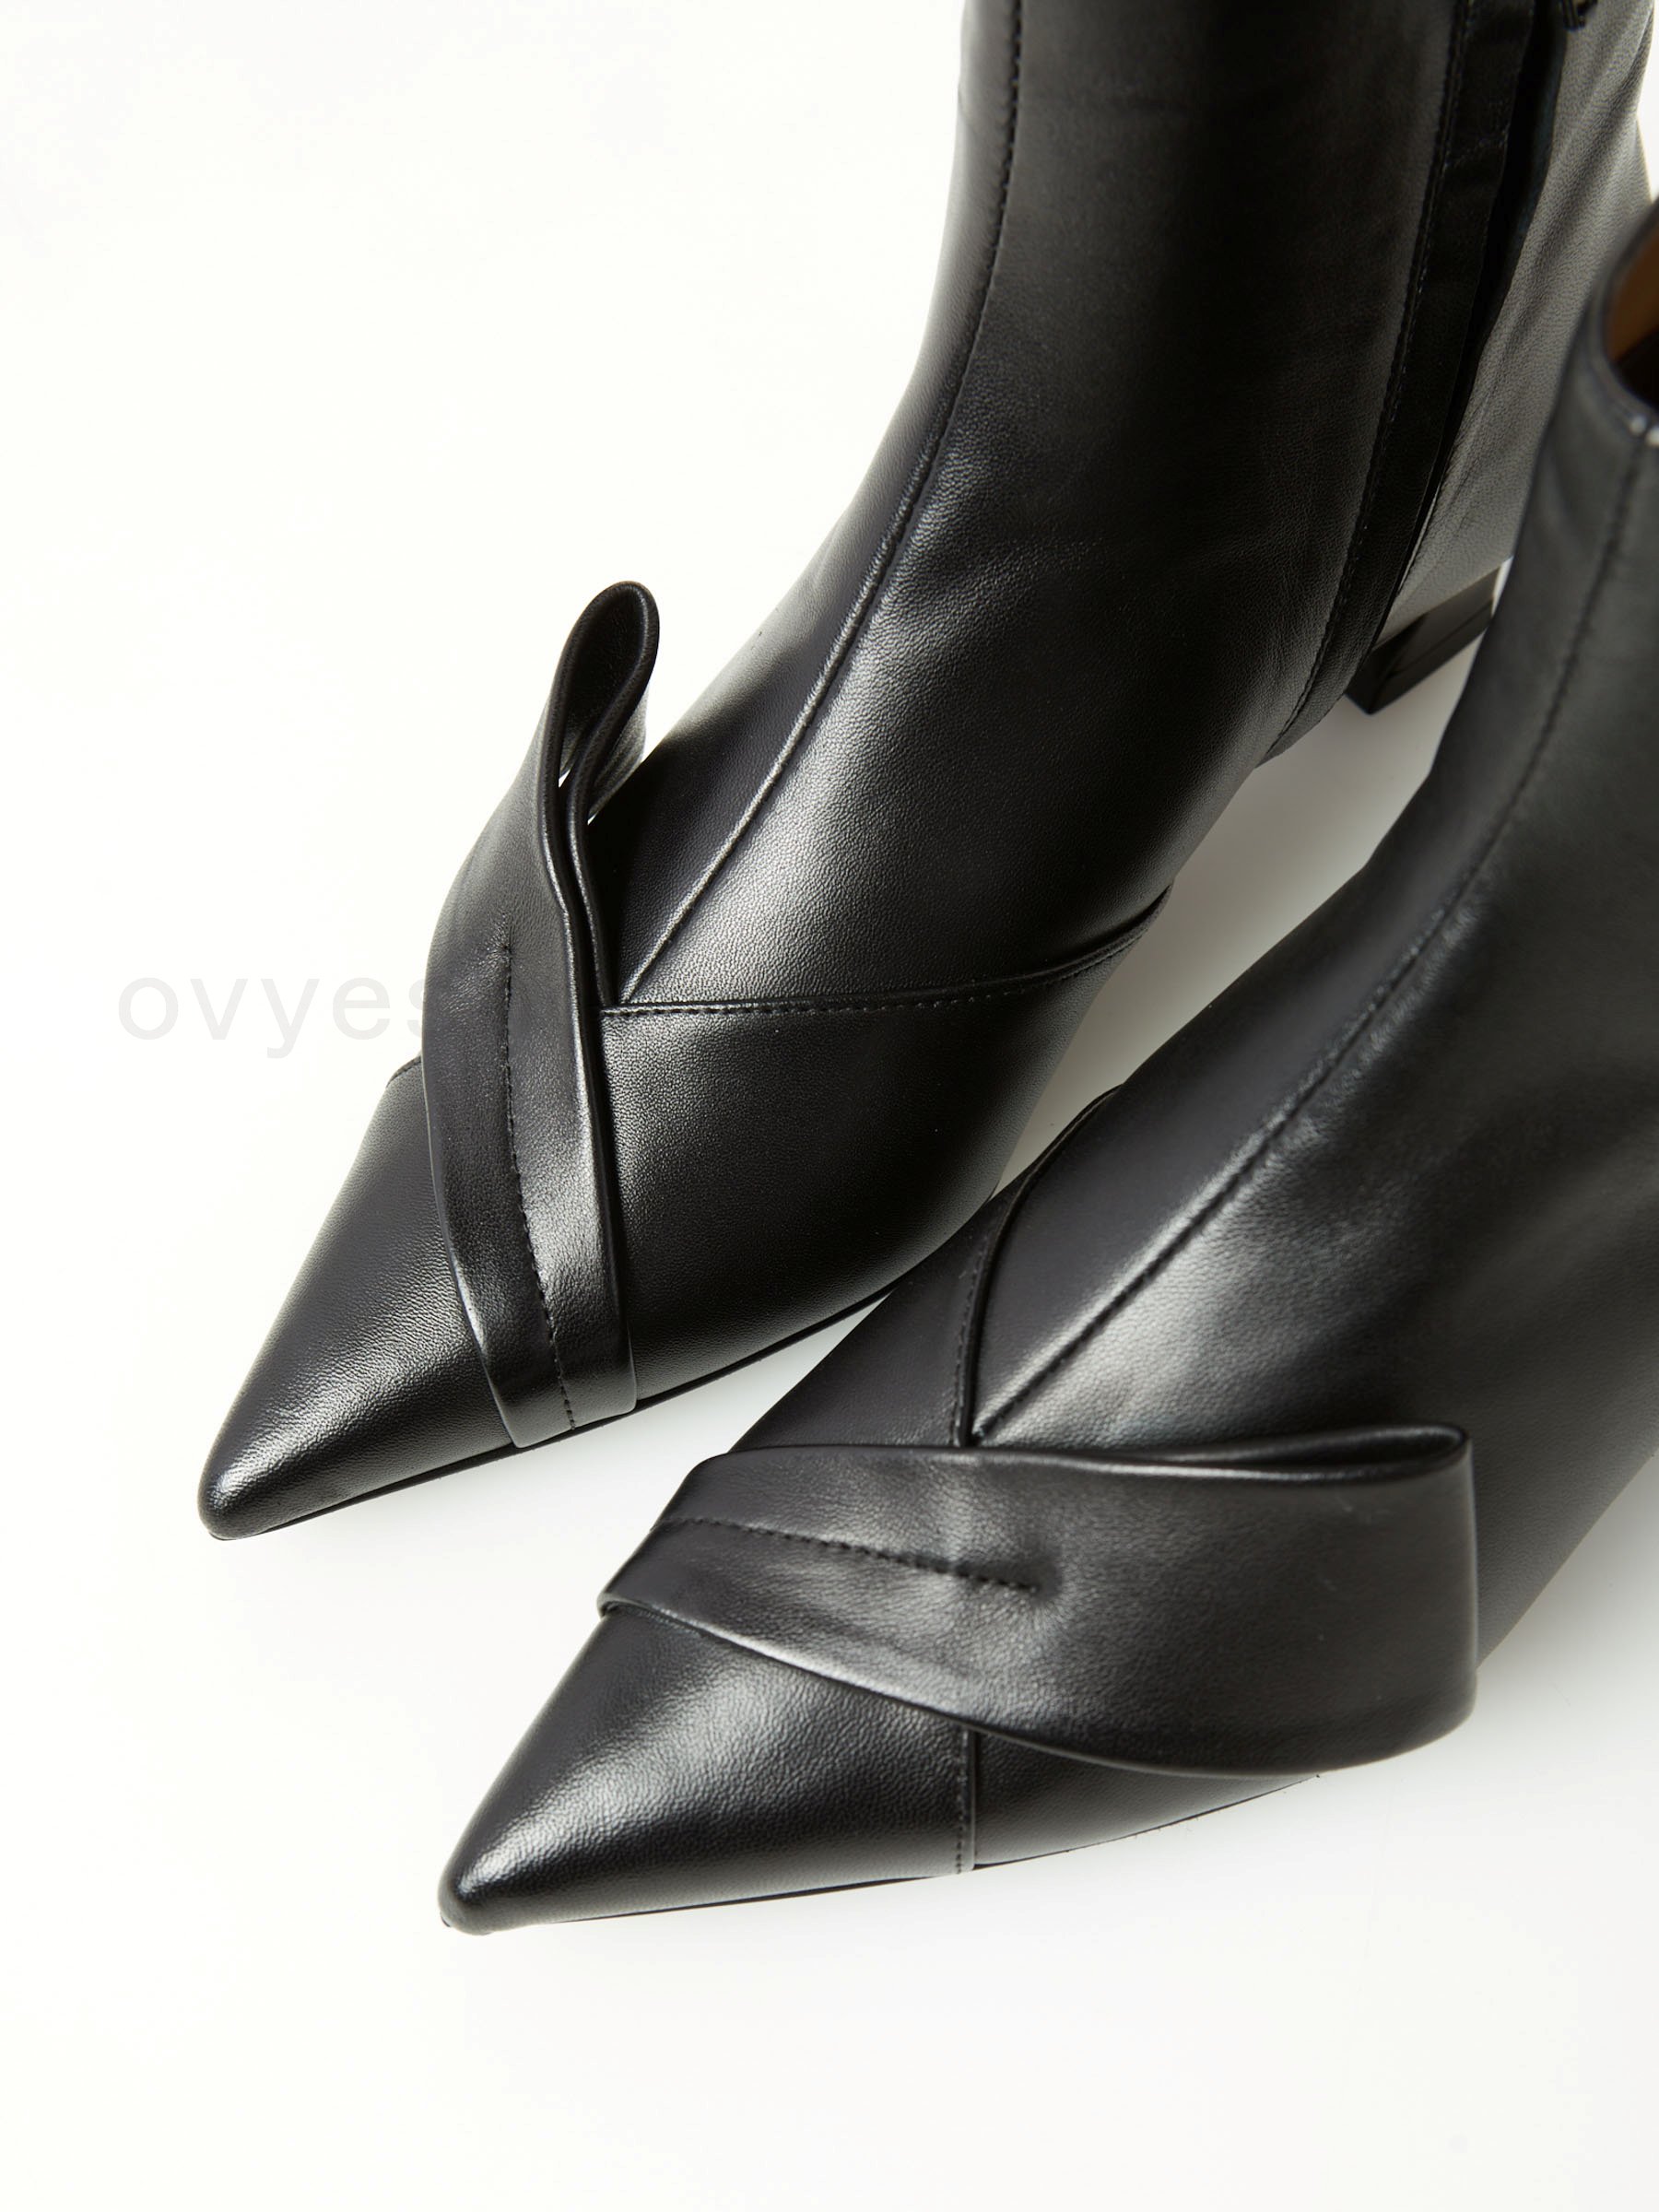 Sale Leather Ankle Boot F0817885-0607 ovy&#233; sito ufficiale